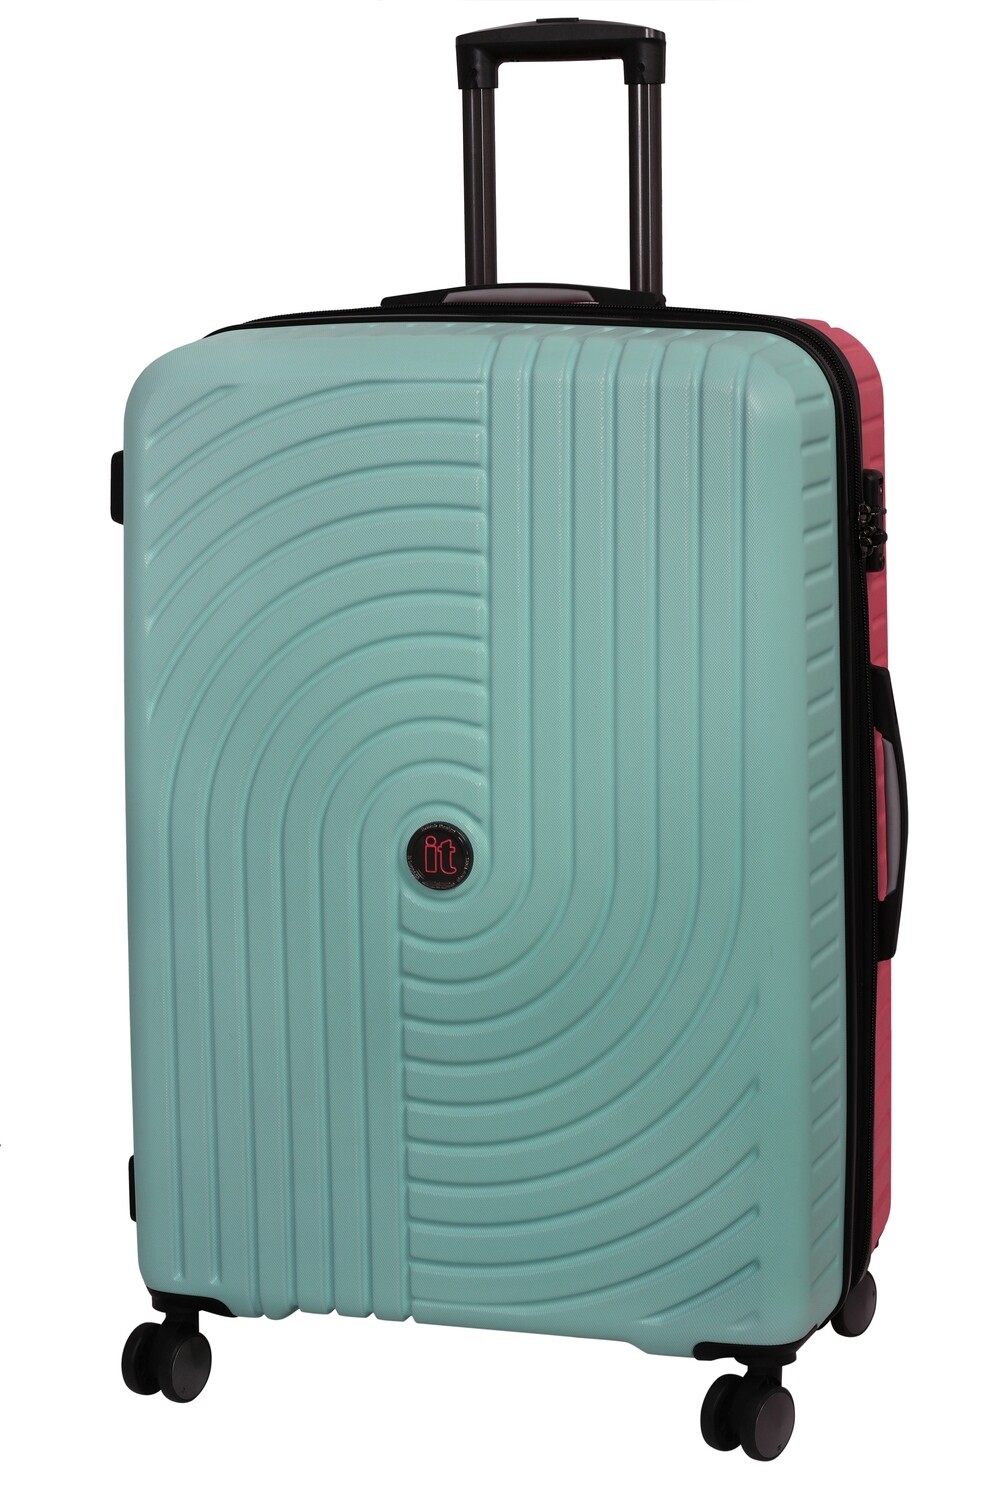 IT LUGGAGE DUO-MIX 29" TROLLEY BEACHGLASS/FUSIONCORAL